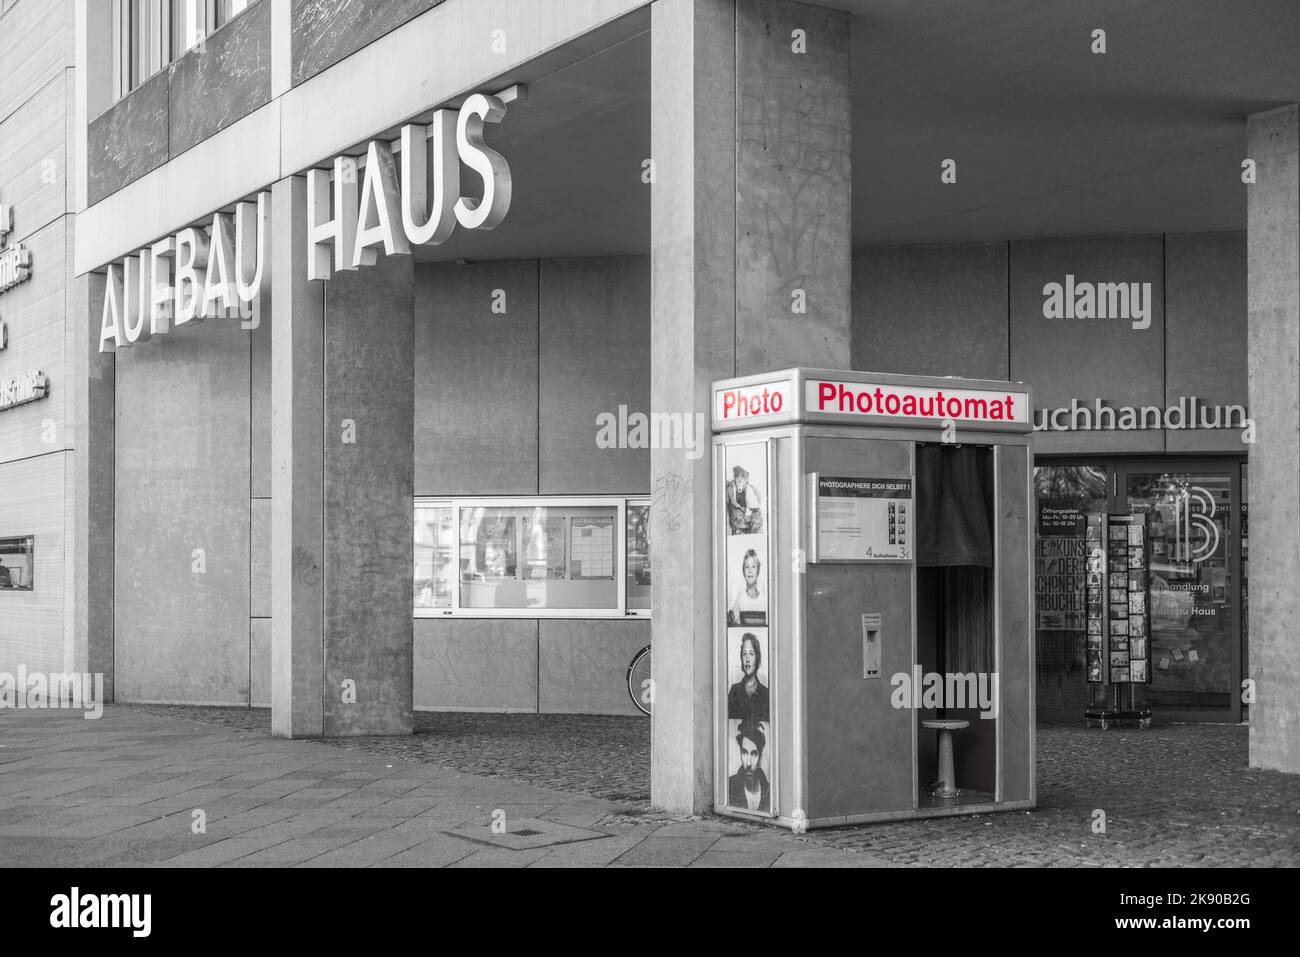 Photoautomat photo booth at Moritzplatz in the Berliner district of Kreuzberg in black and white/ selective colour, Berlin, Germany, Europe Stock Photo